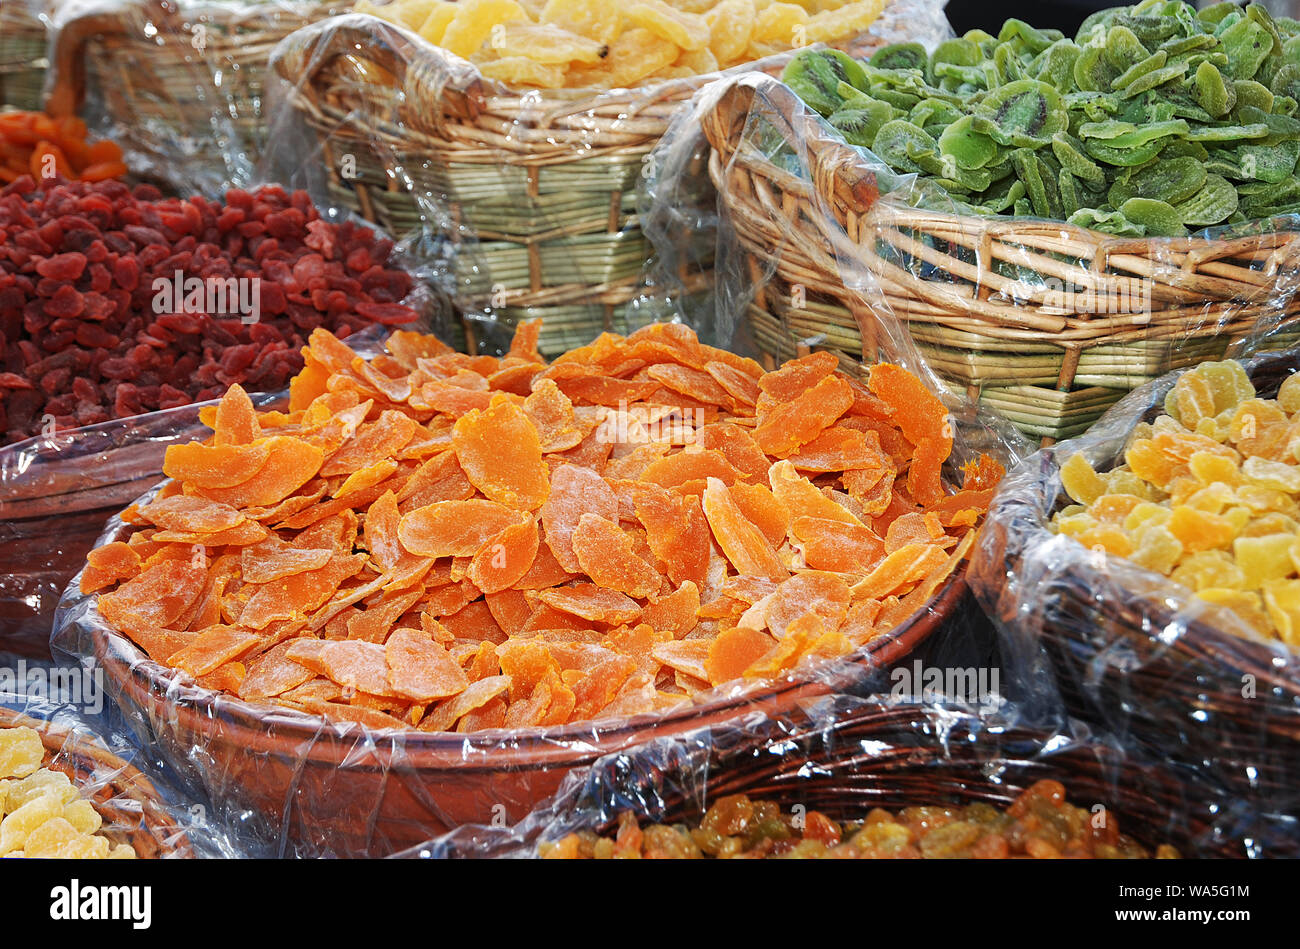 Dried fruits on market in Italy Stock Photo